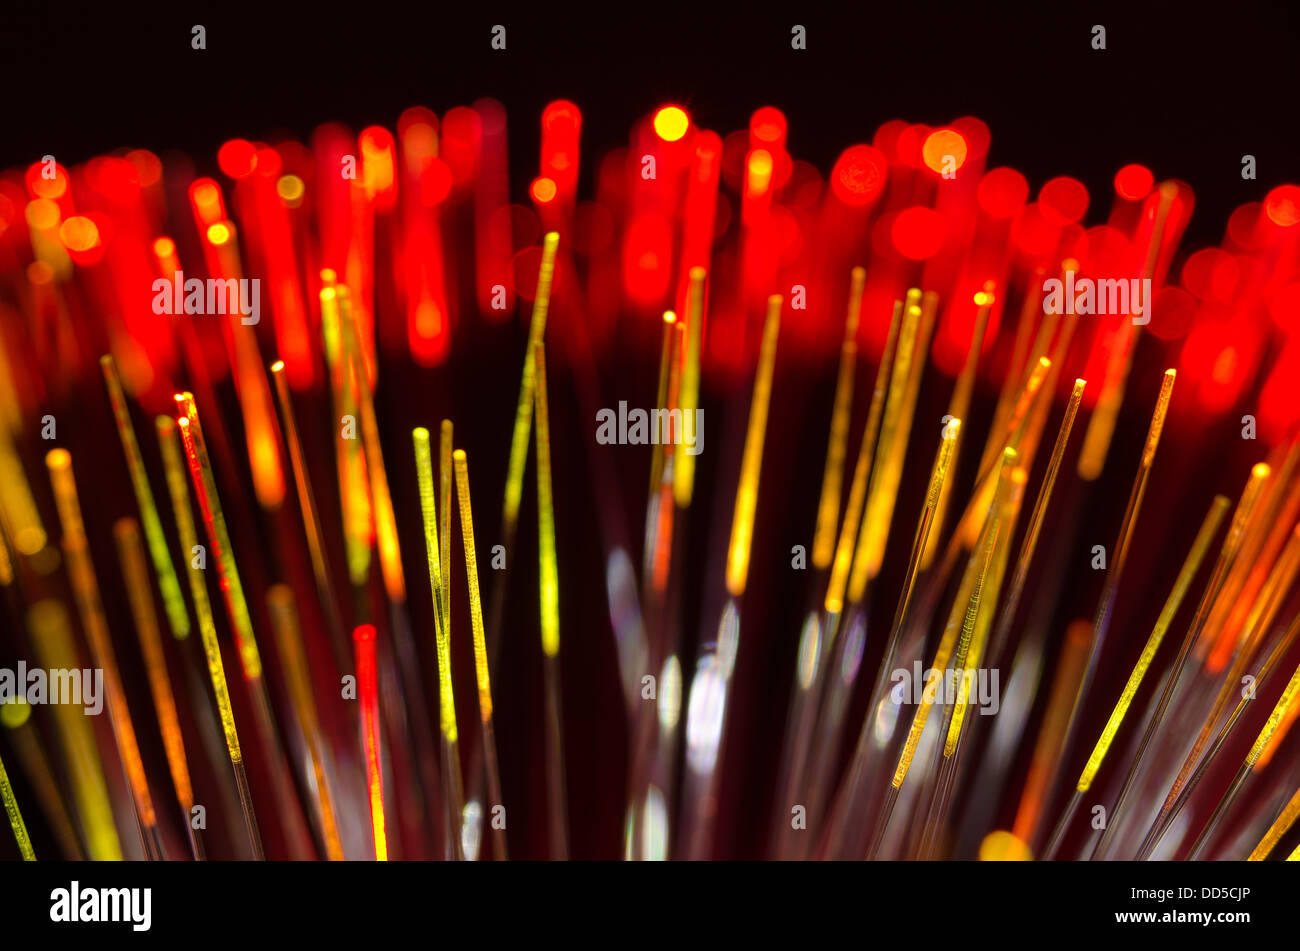 fiber optic light communication cable means of high volume of digital data stream information info Stock Photo